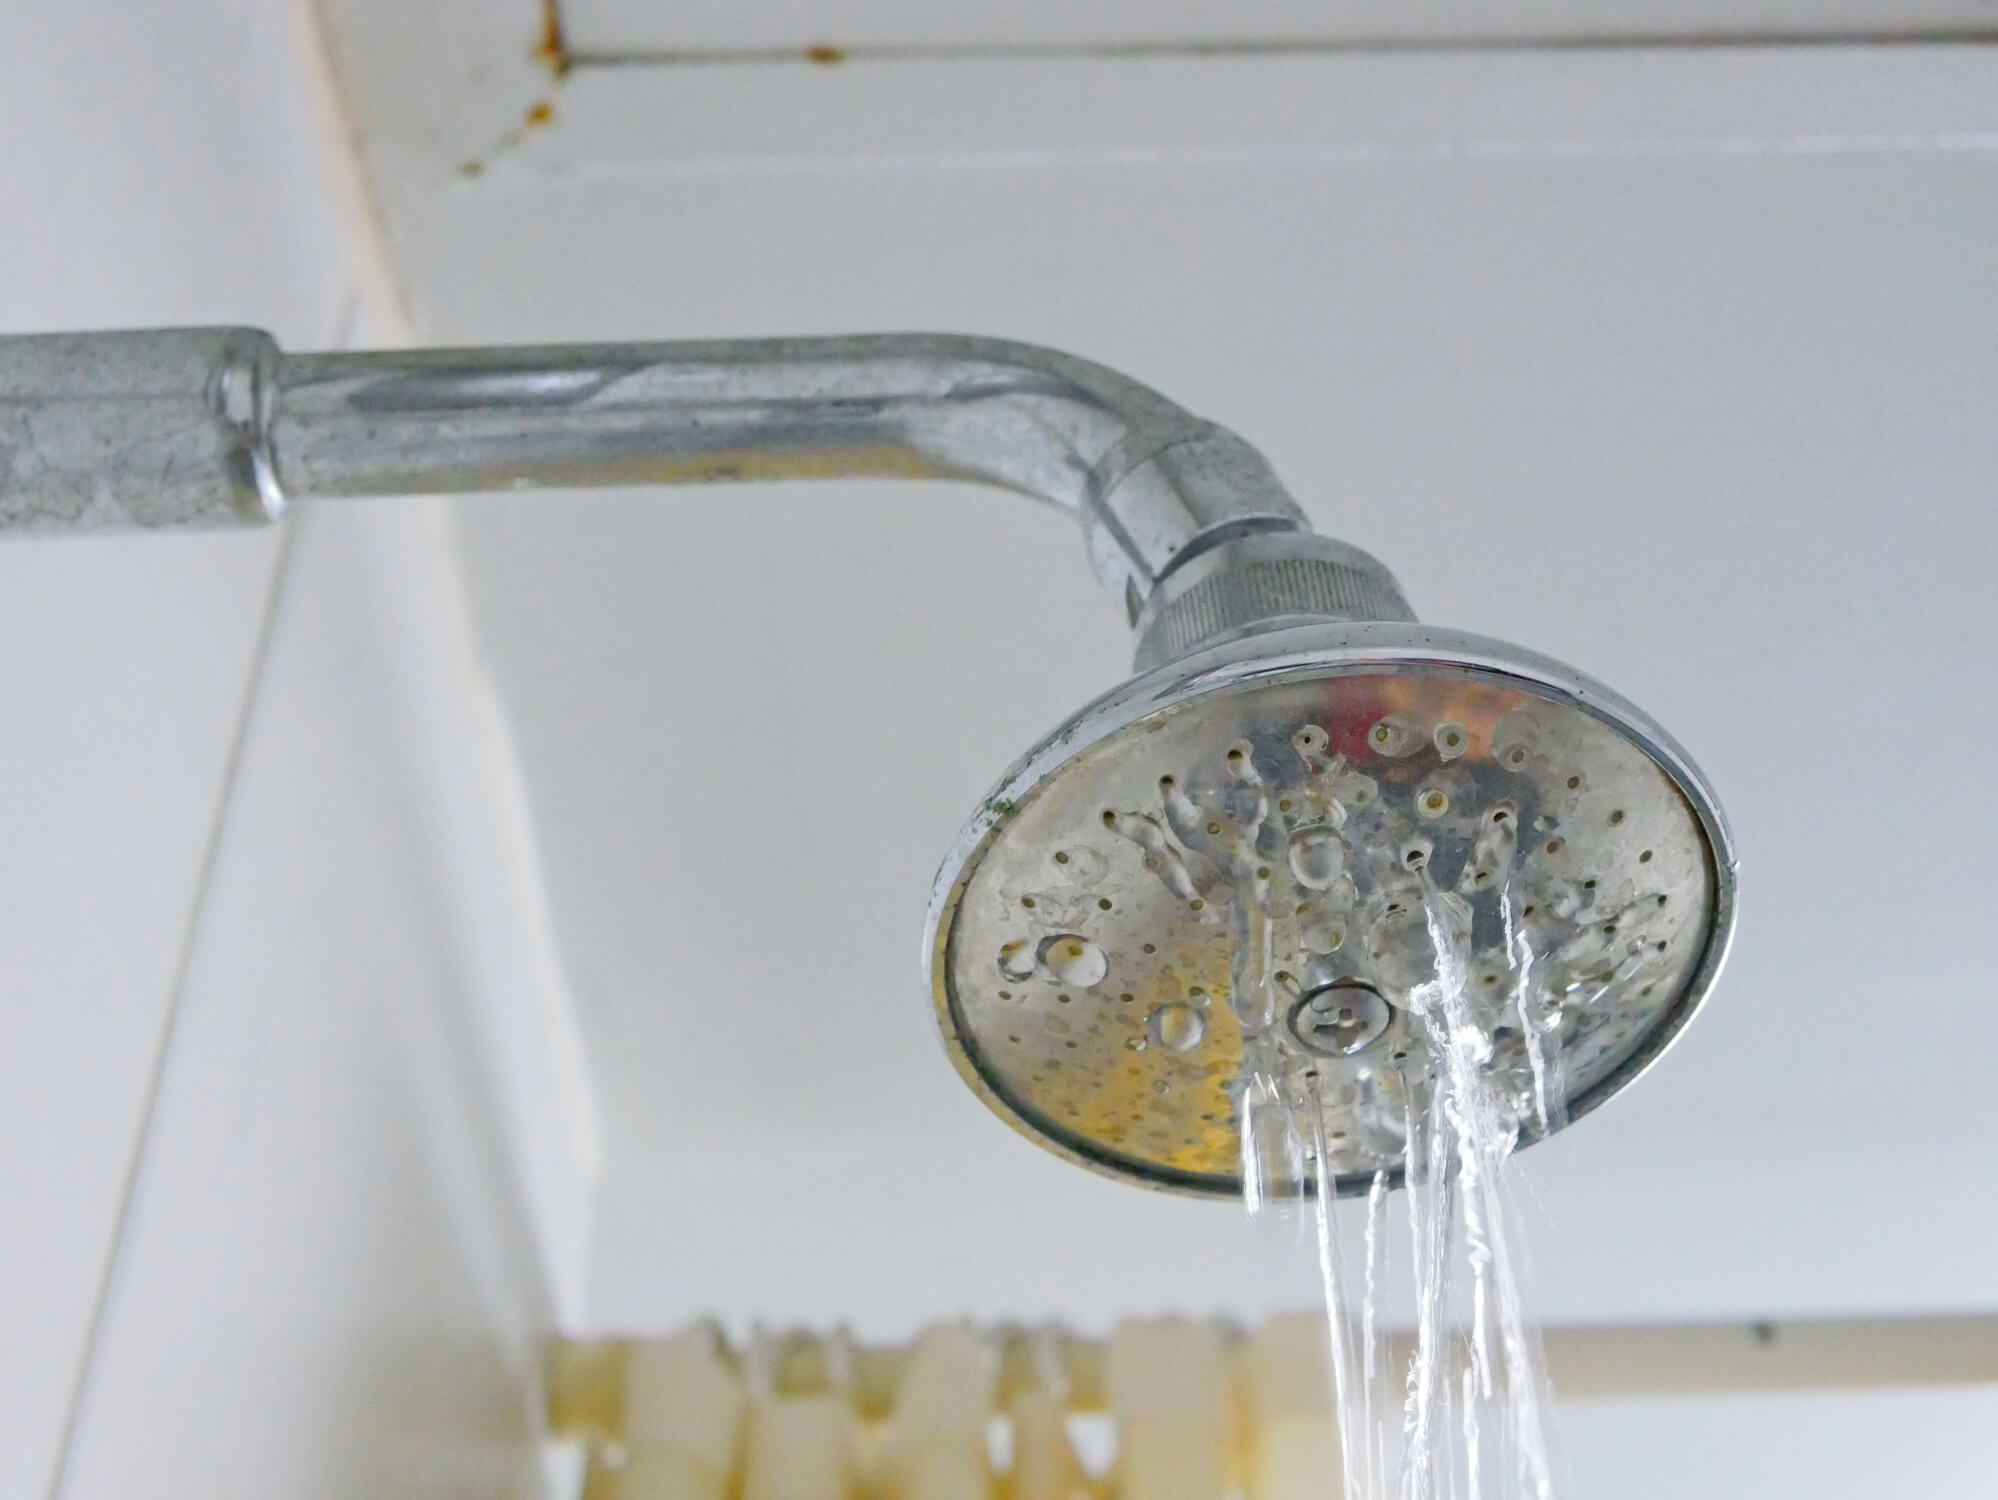 Common Plumbing Emergencies and Ways to Deal With Them